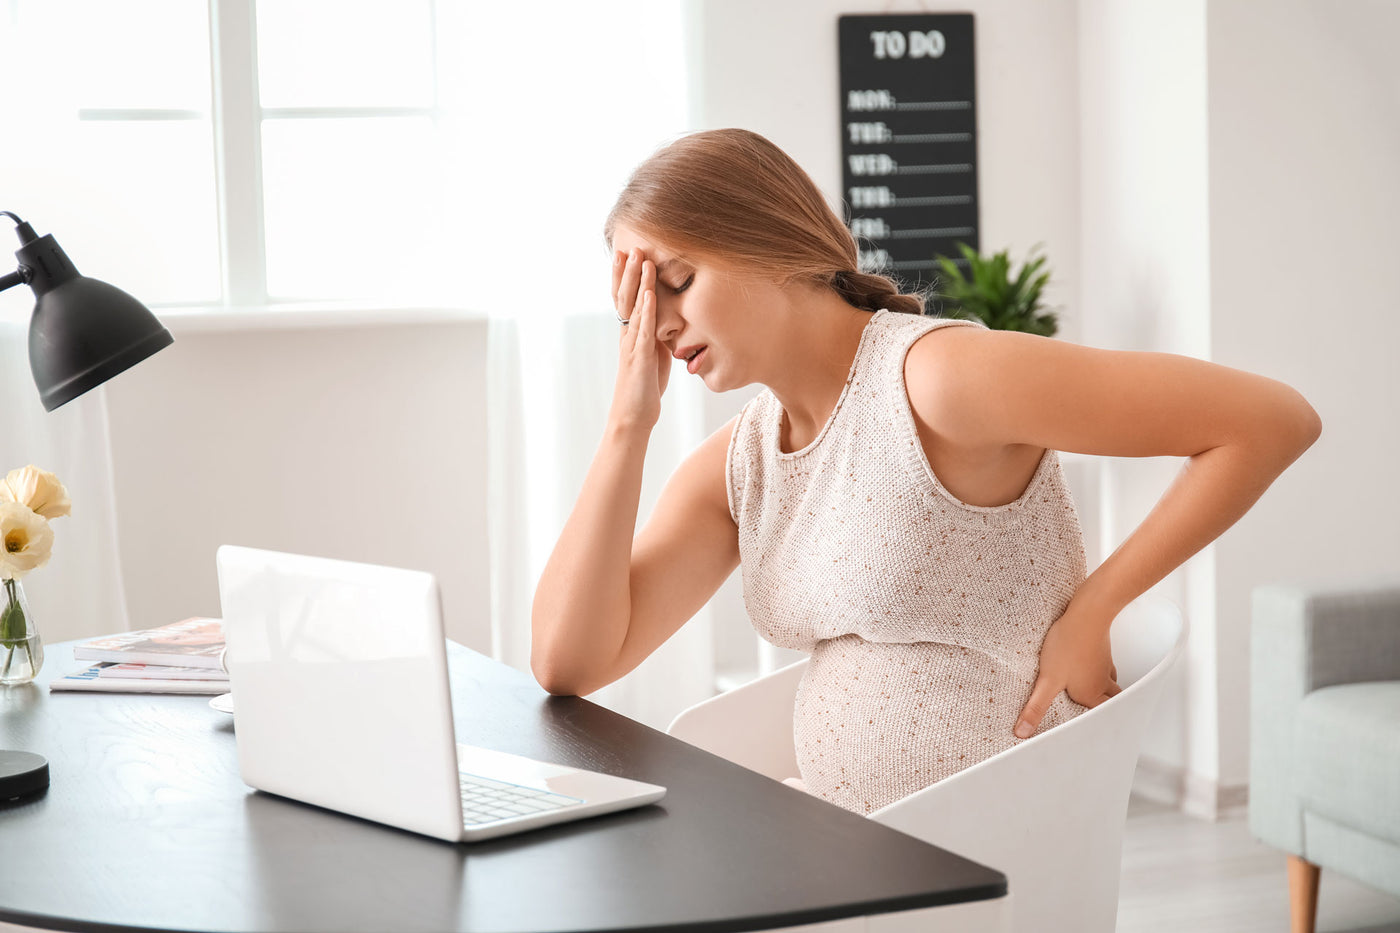 How to Deal With Pregnancy Anxiety